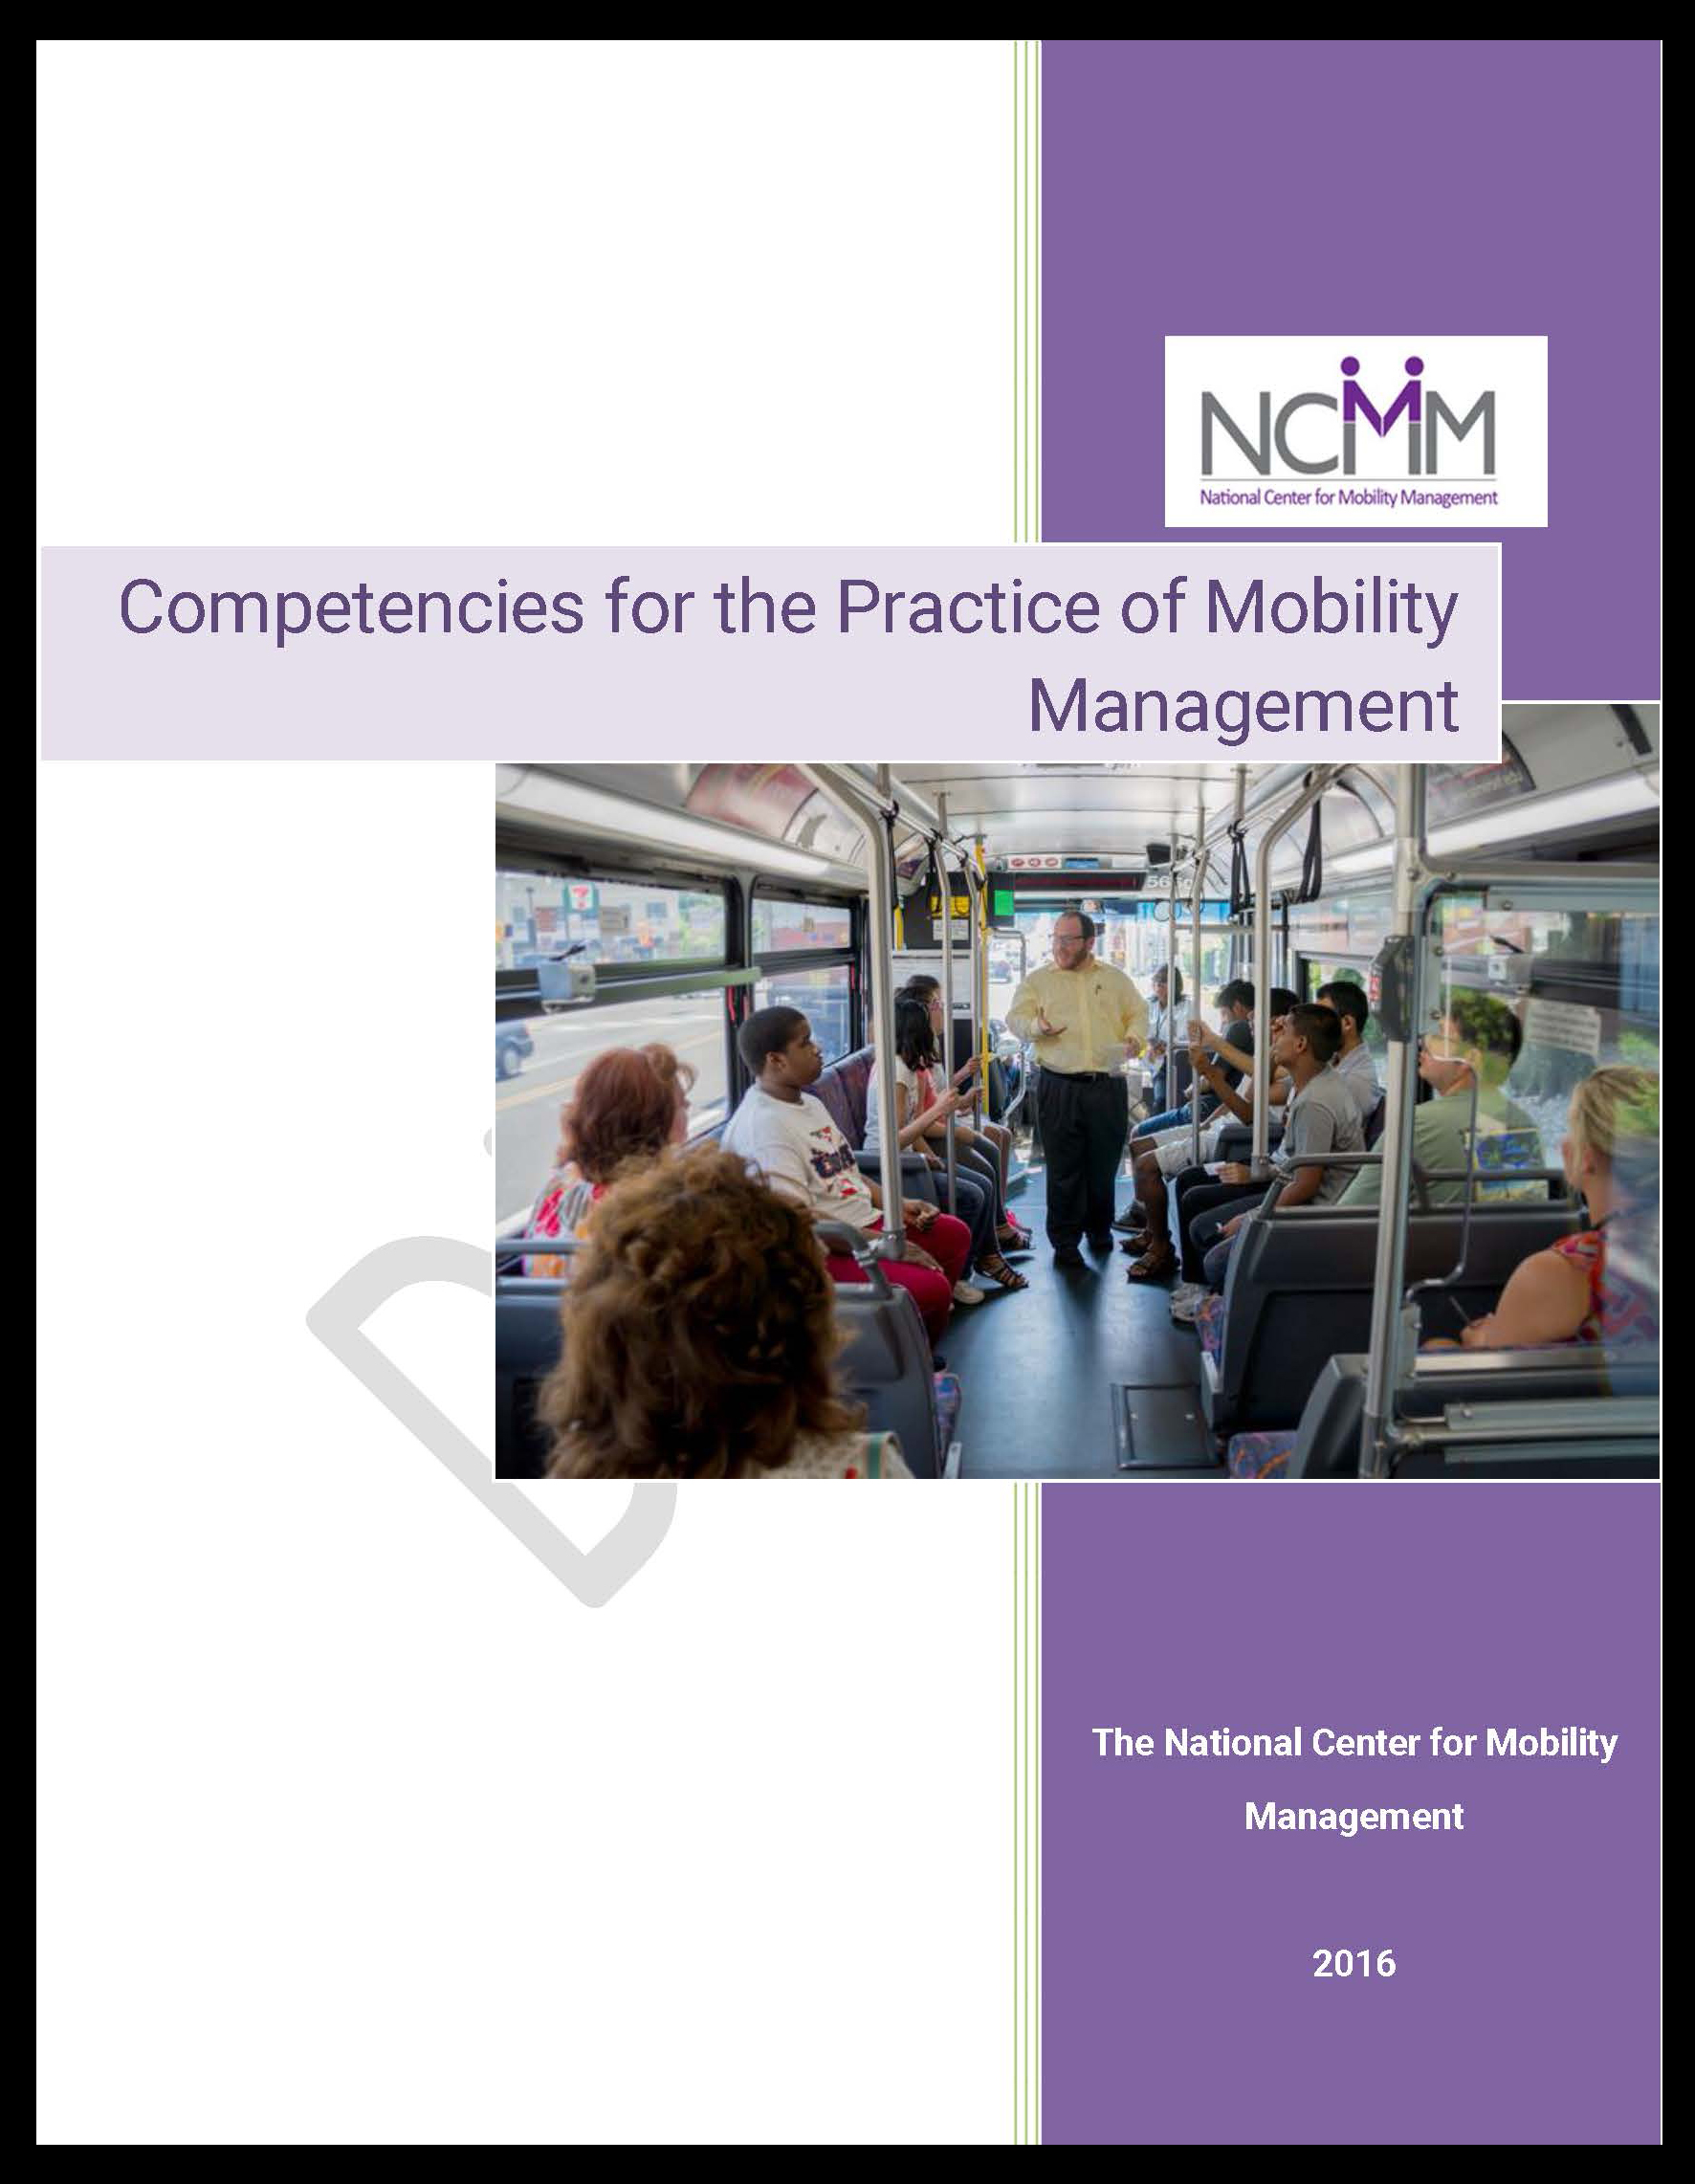 Front cover of Mobility Management Competencies Report